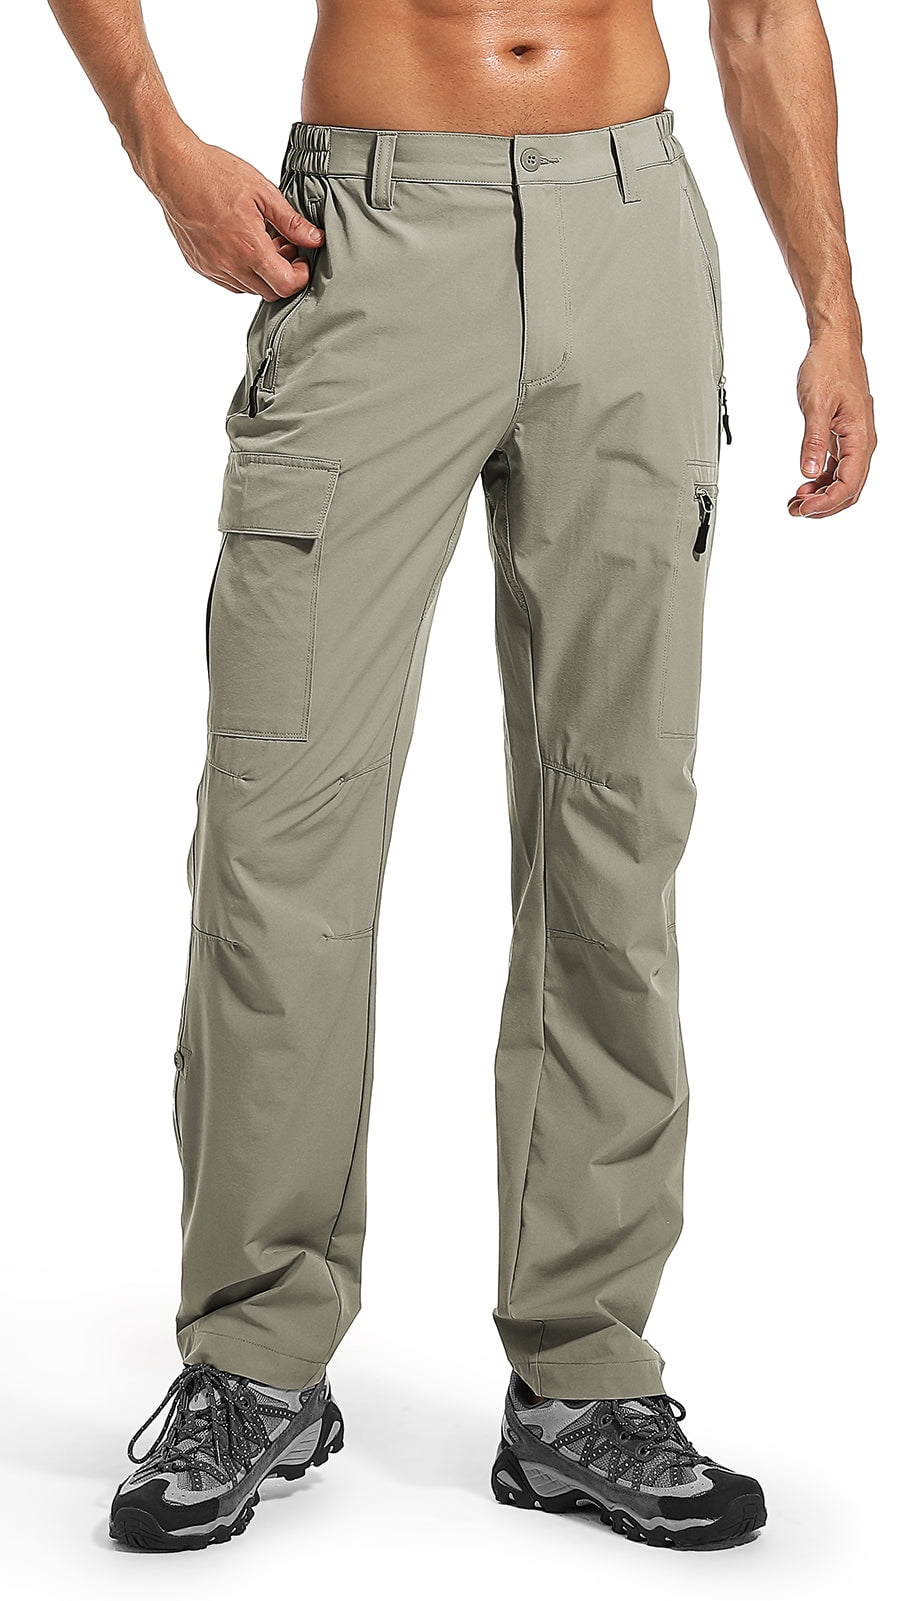 Moosehill Men's Hiking Cargo Pants Lightweight Quick Dry Waterproof Fishing  Pants for Tactical Outdoor Hunting Camping 